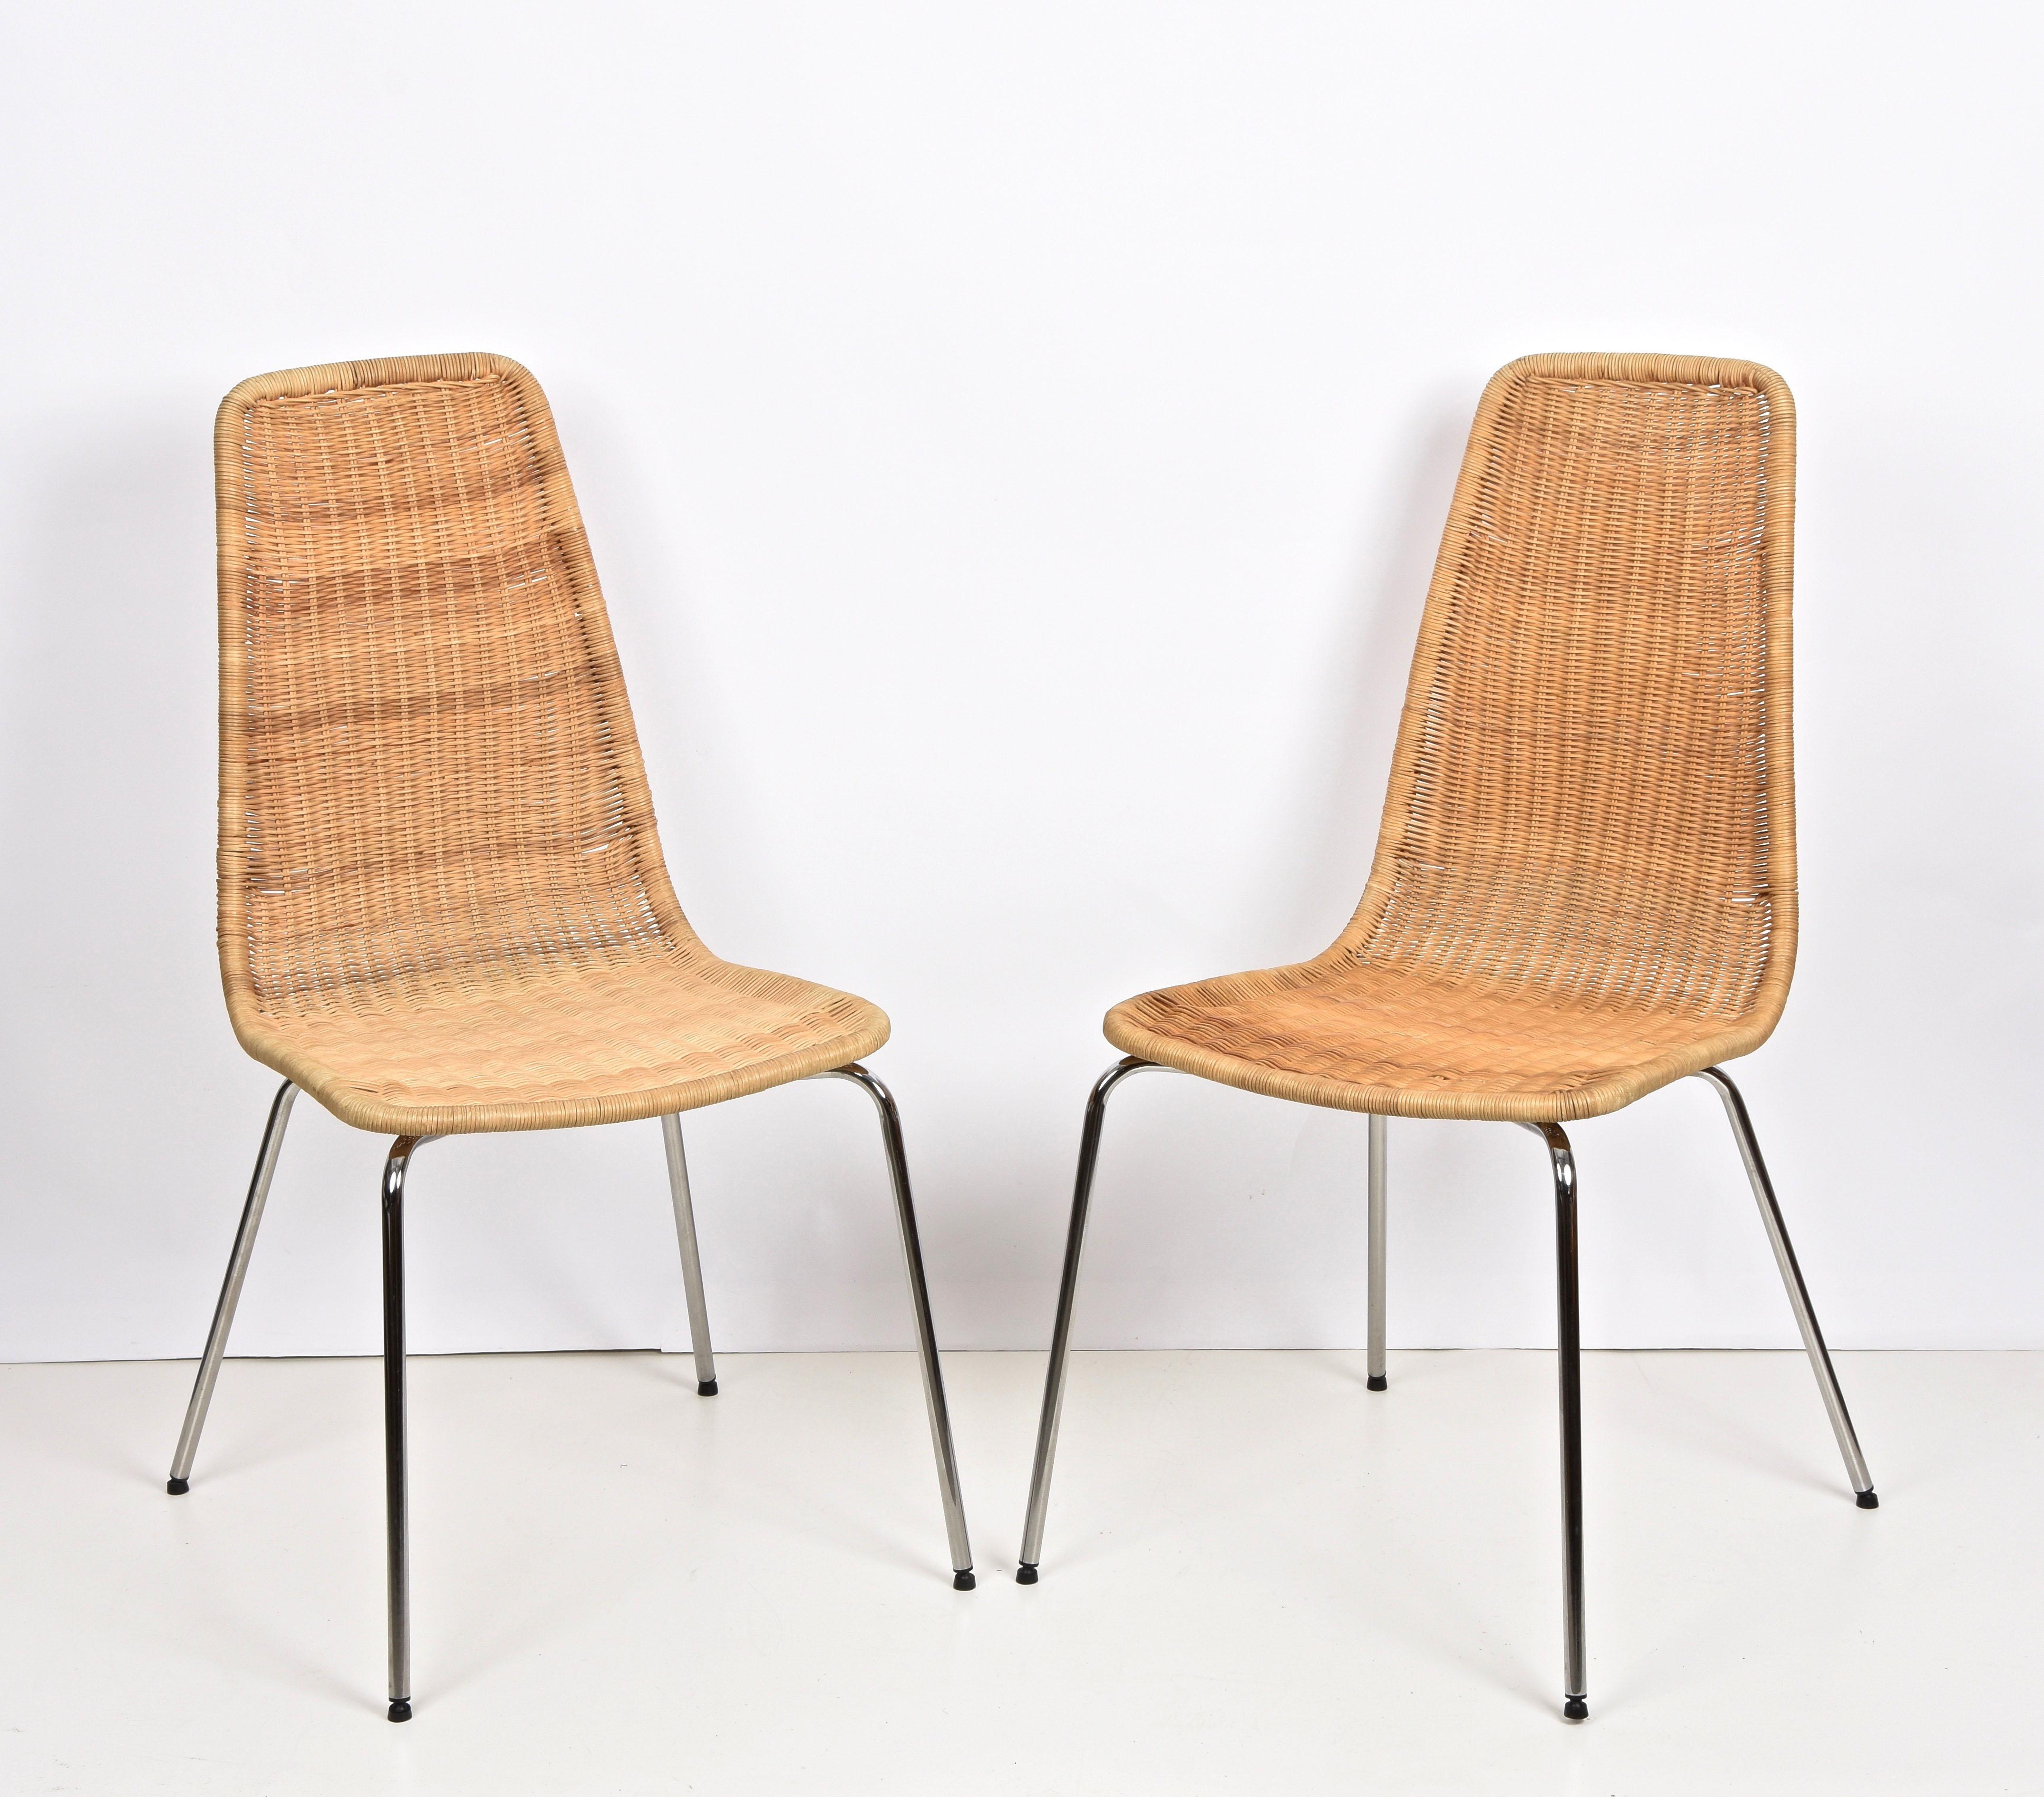 Midcentury Chromed Metal with Removable Rattan and Wicker Italian Chairs, 1970s For Sale 5